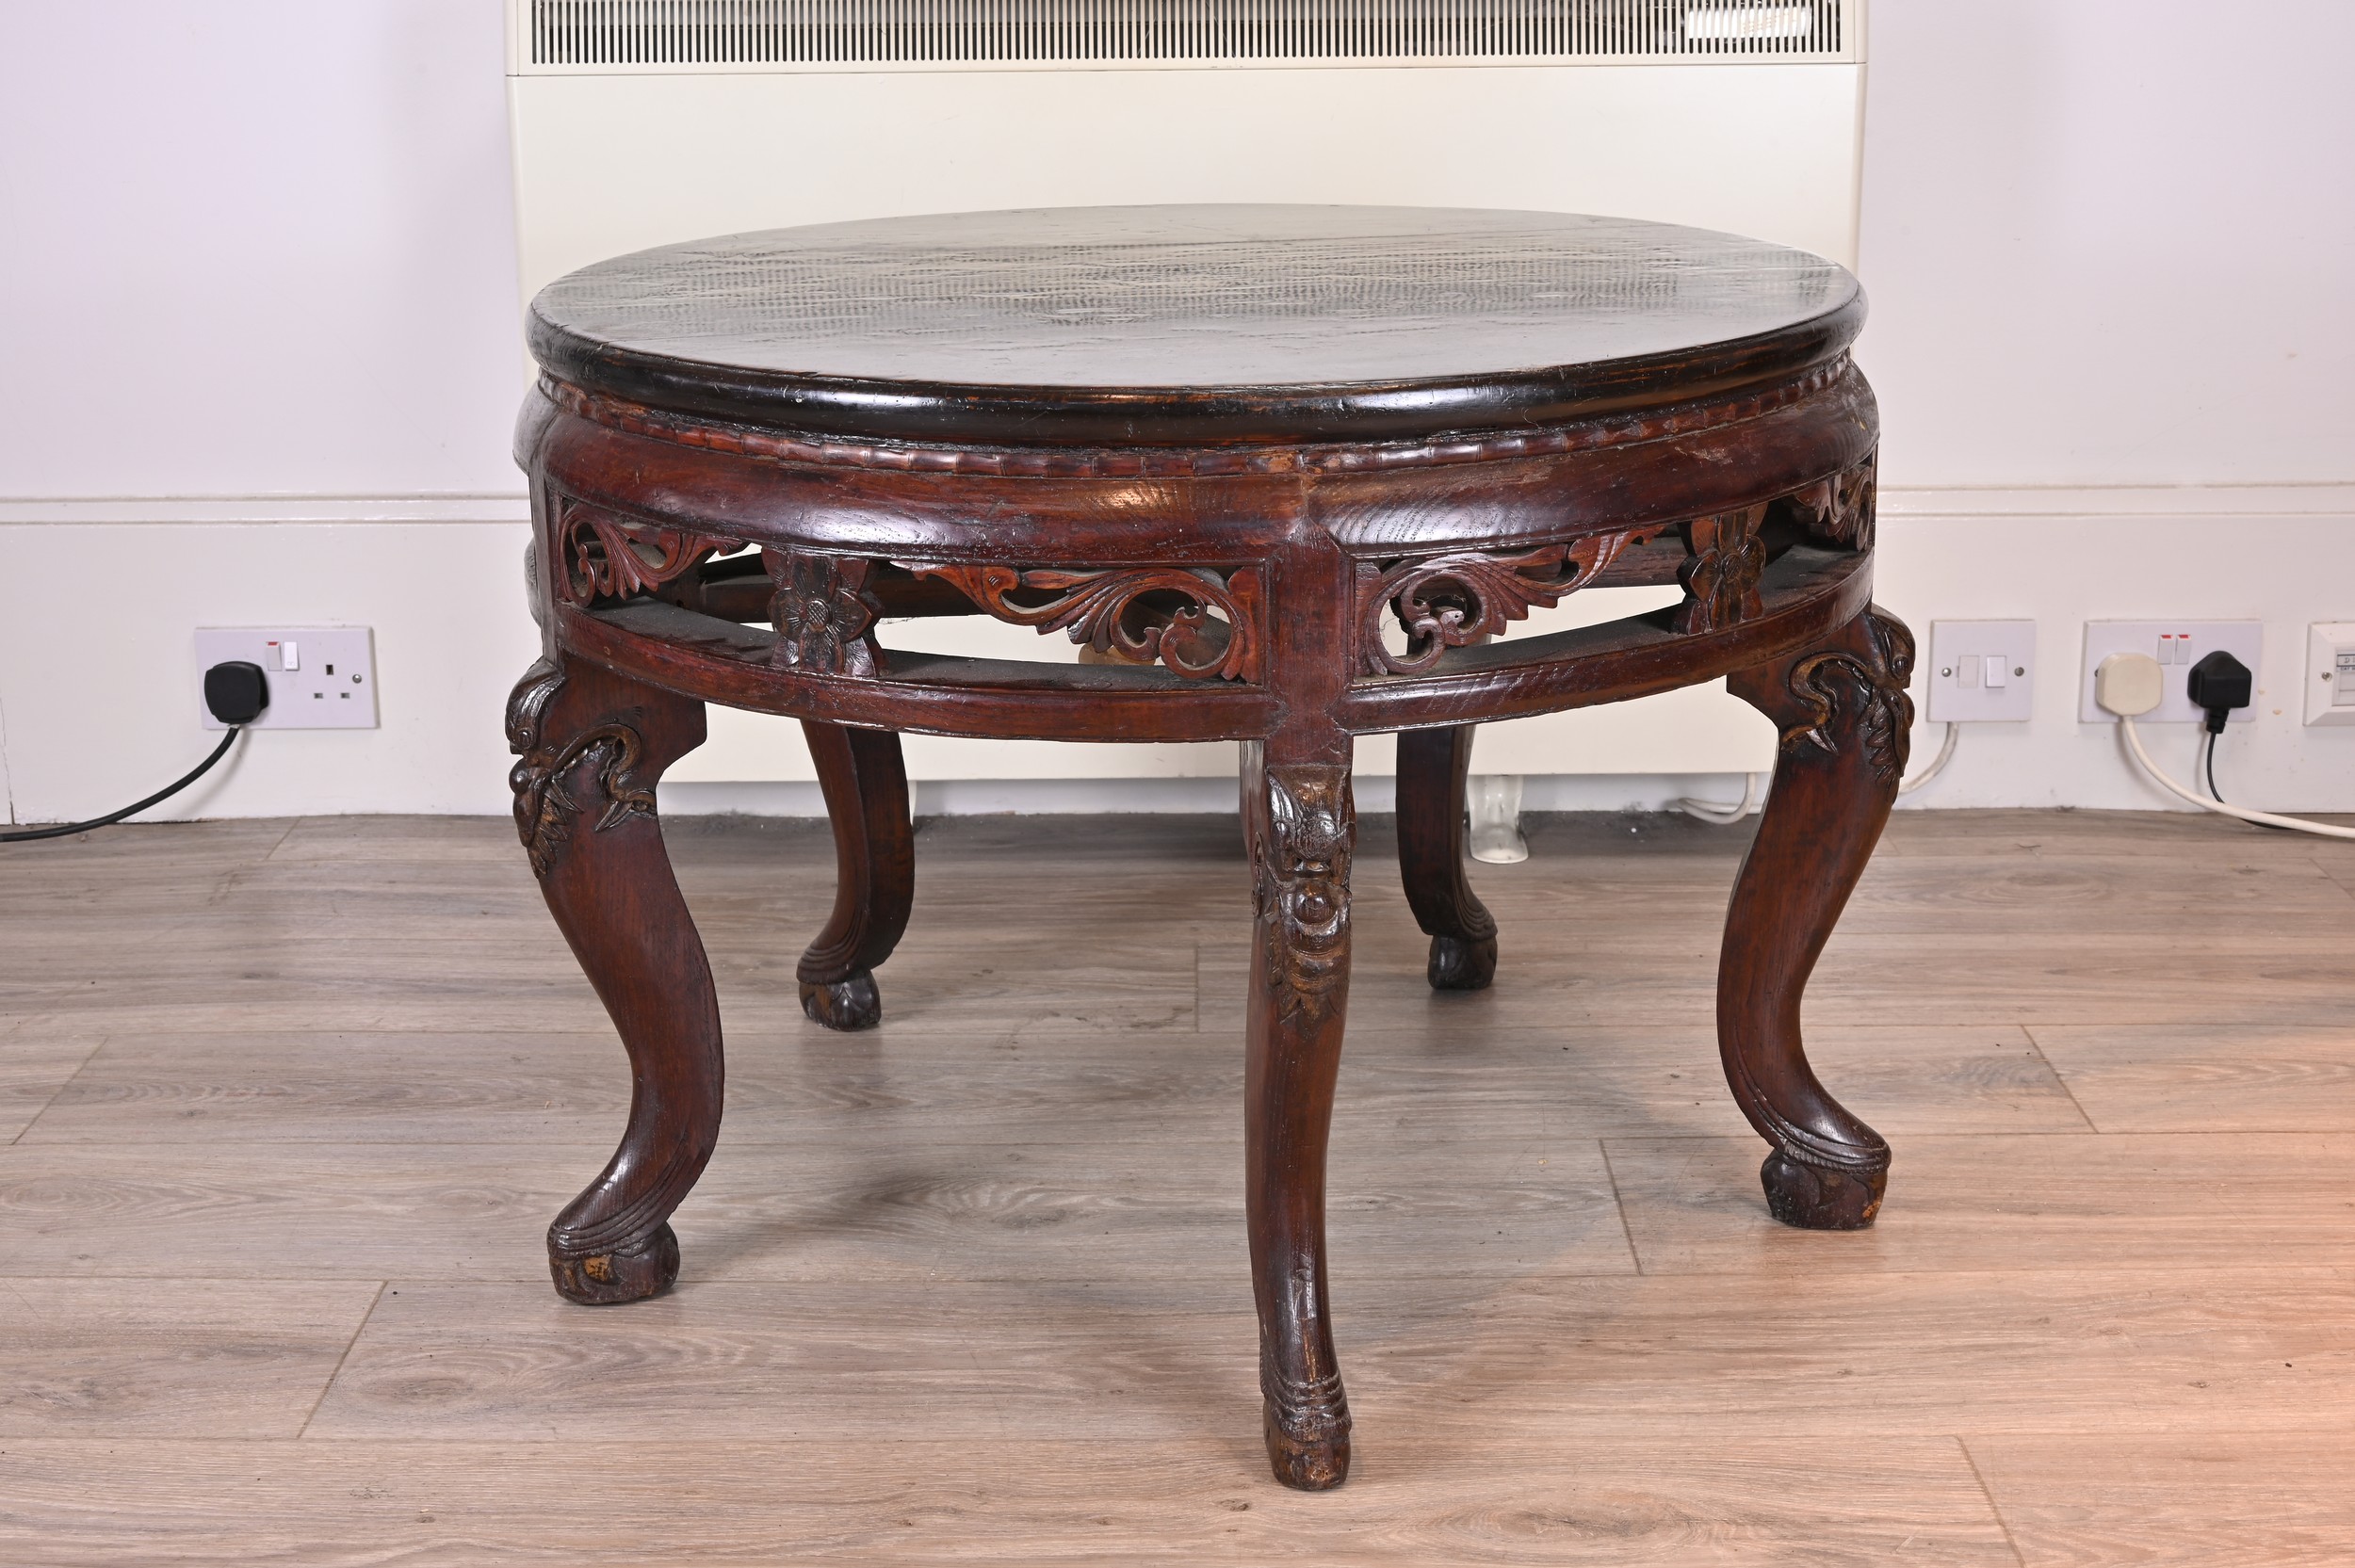 CHINESE 19TH/20TH CENTURY CIRCULAR HARDWOOD LOW TABLE, with black lacquer top and carved floral - Image 3 of 6